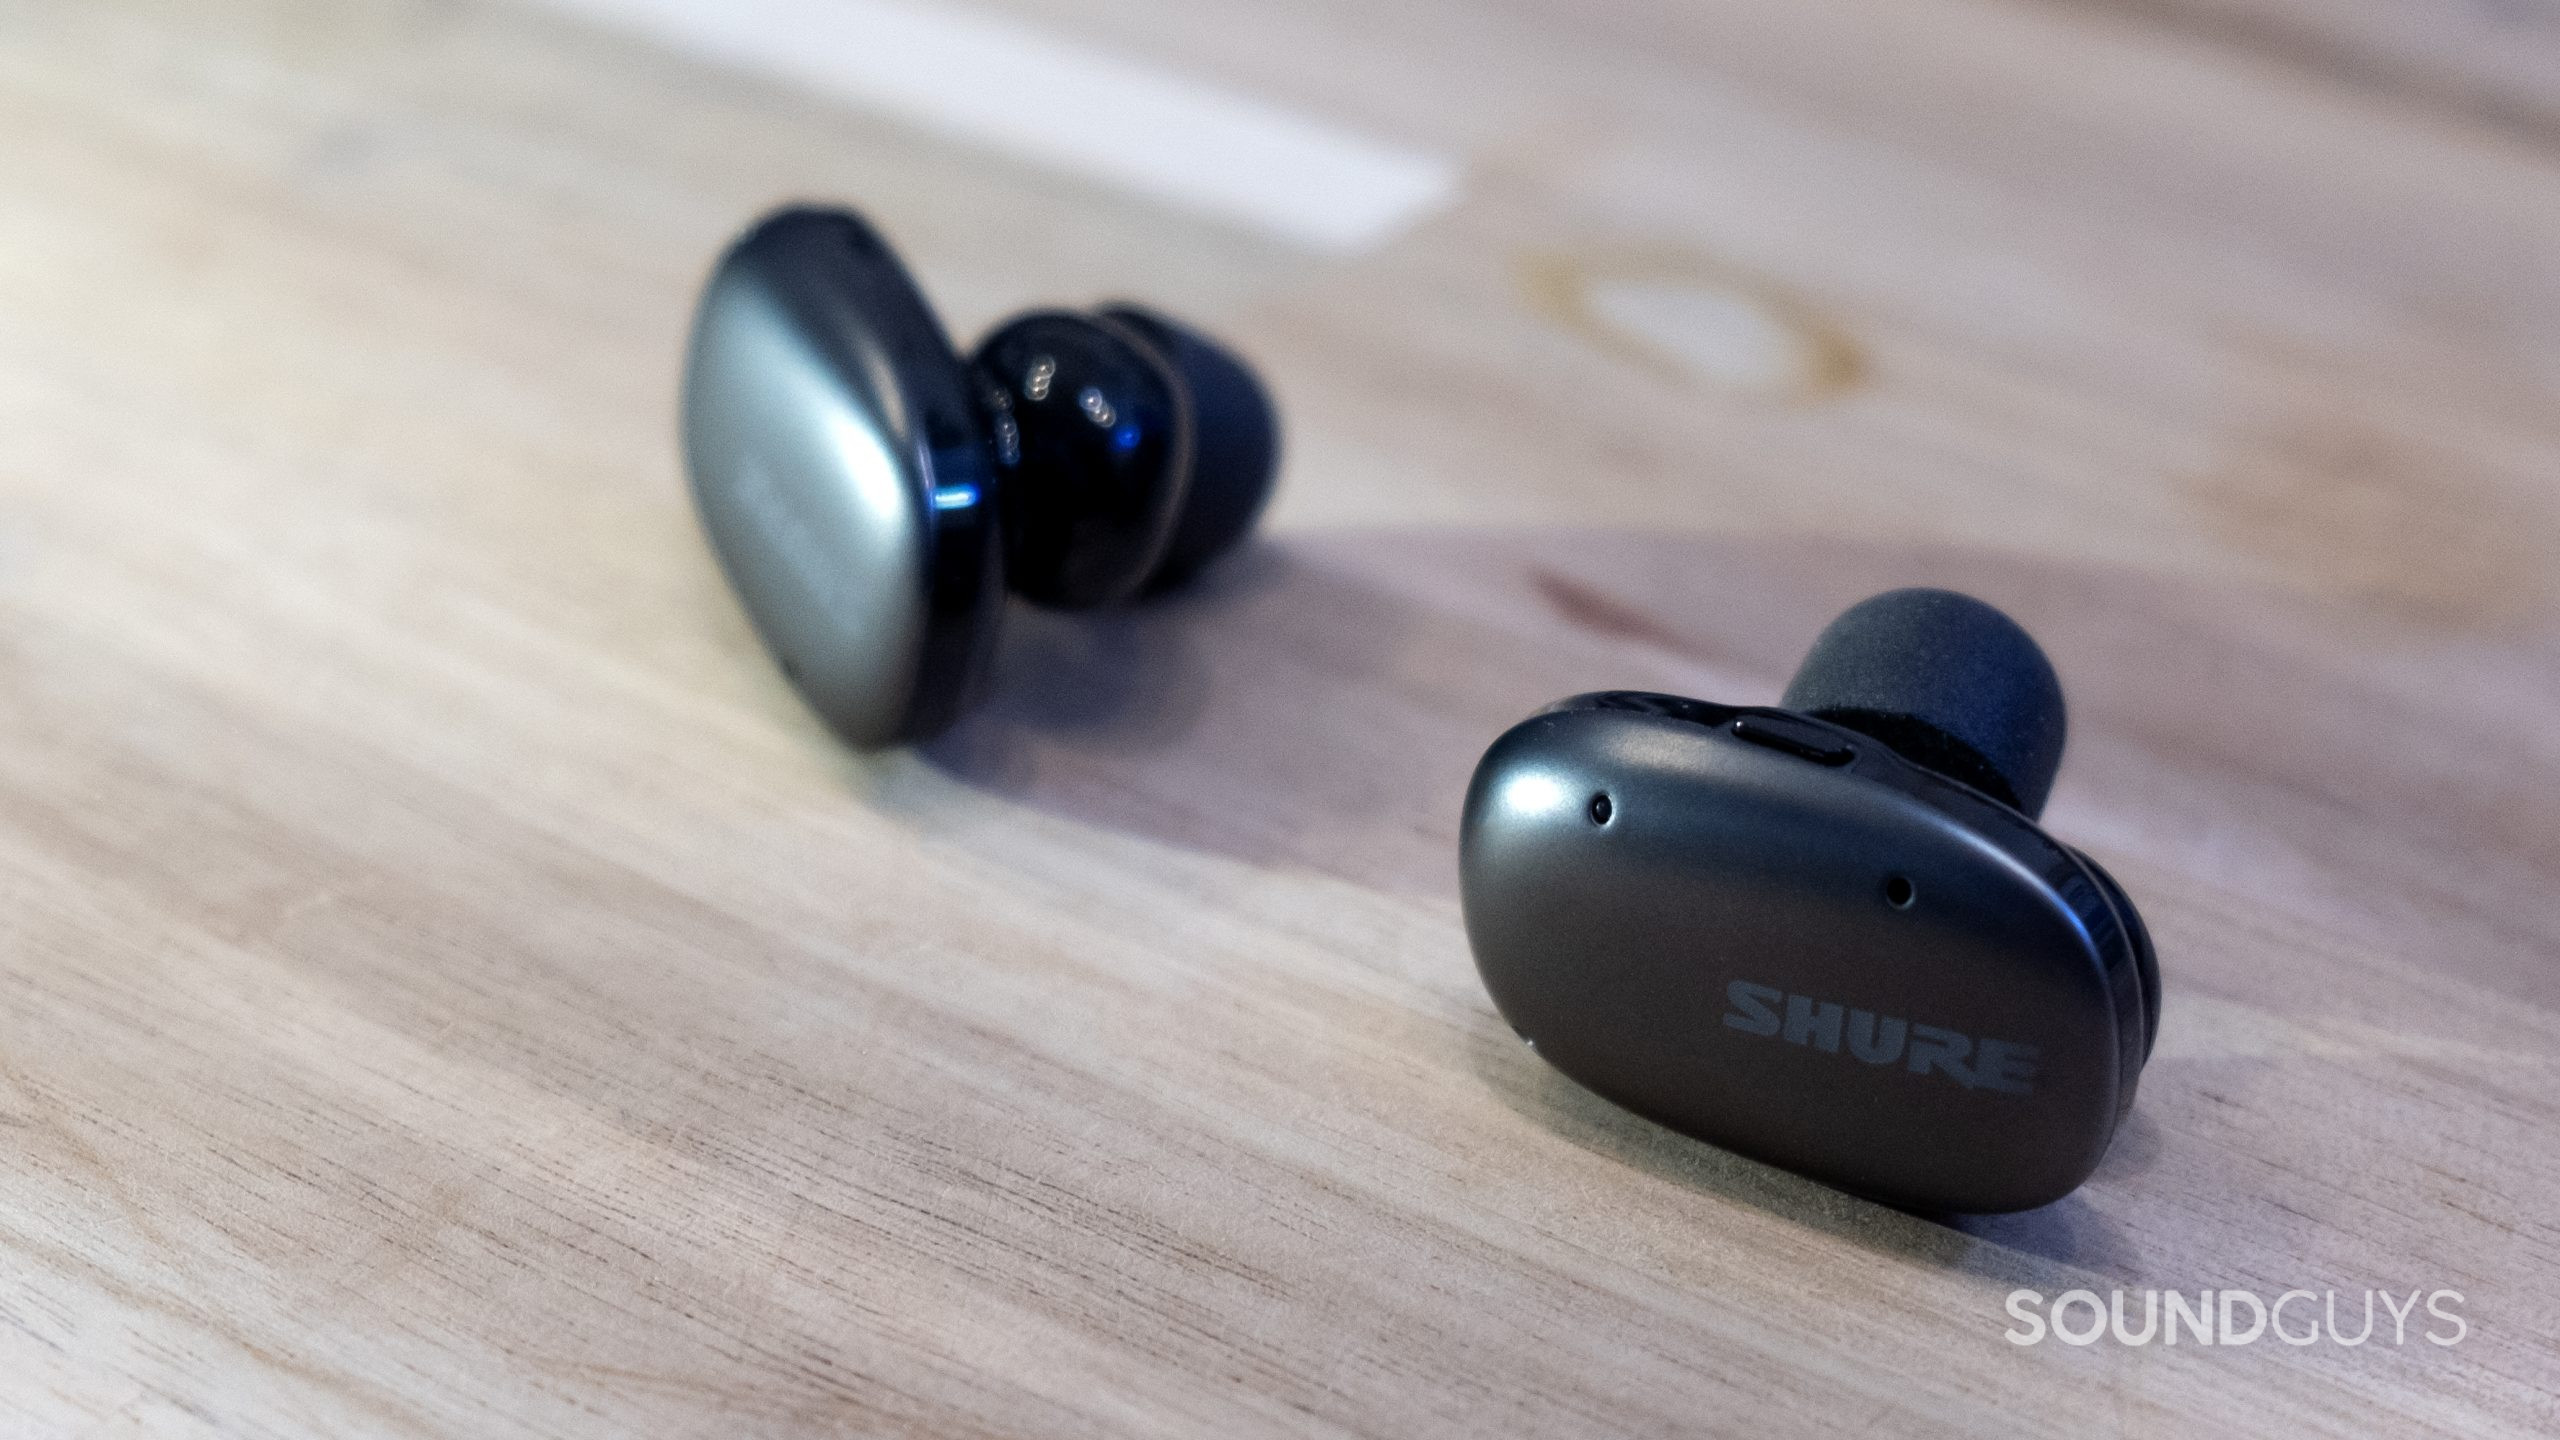 A close up of the Shure AONIC Free earbuds on a light wood surface.